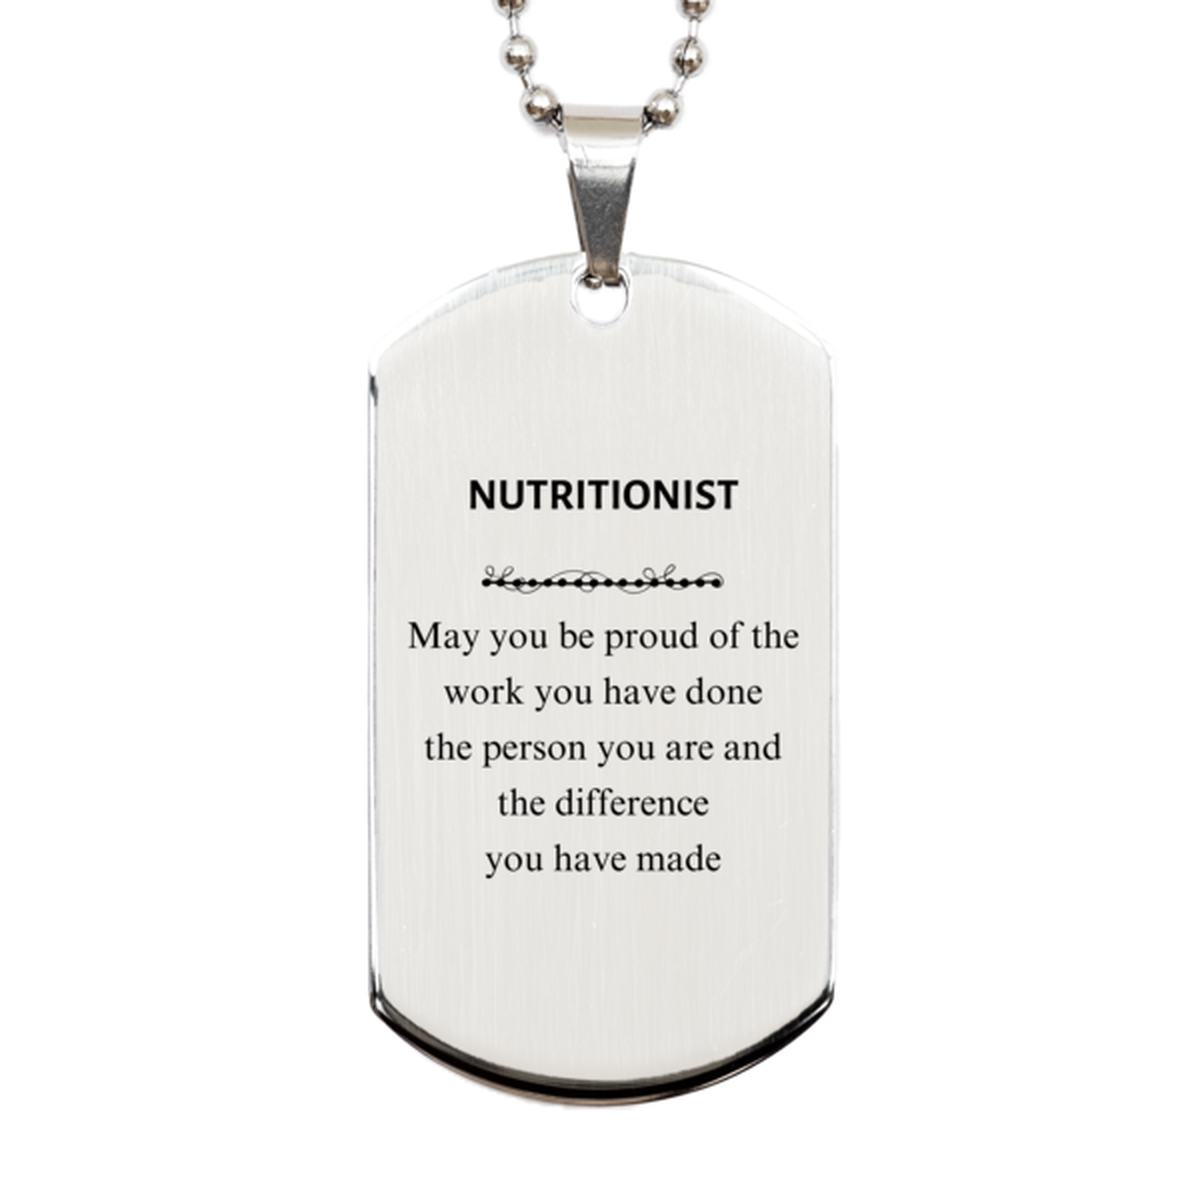 Nutritionist May you be proud of the work you have done, Retirement Nutritionist Silver Dog Tag for Colleague Appreciation Gifts Amazing for Nutritionist